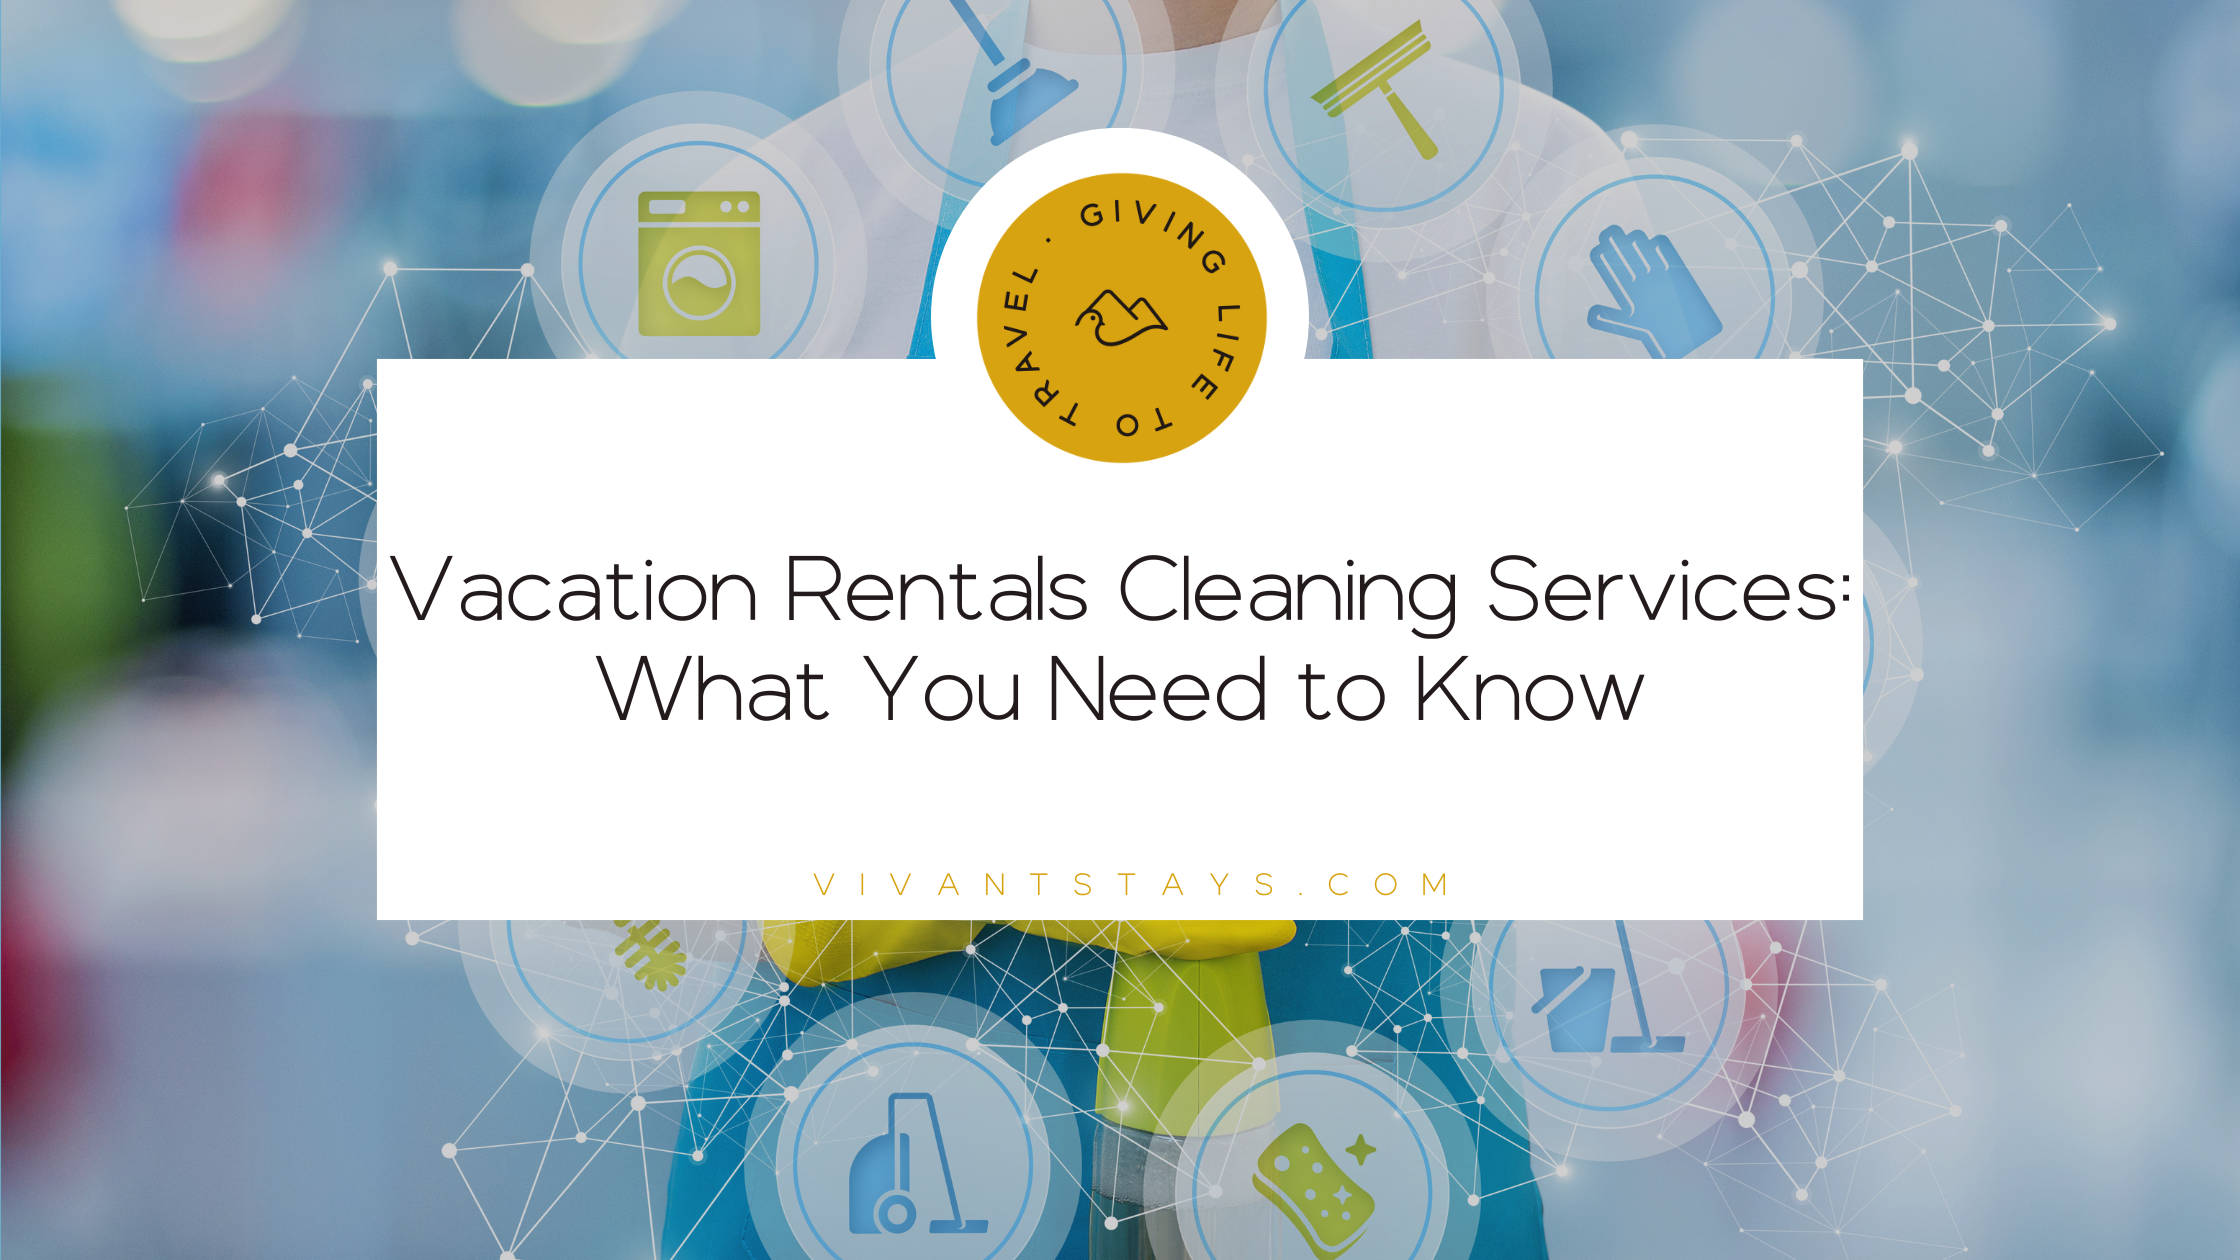 Image of Vivant's blog banner titled "Vacation Rentals Cleaning Services: What You Need To Know"